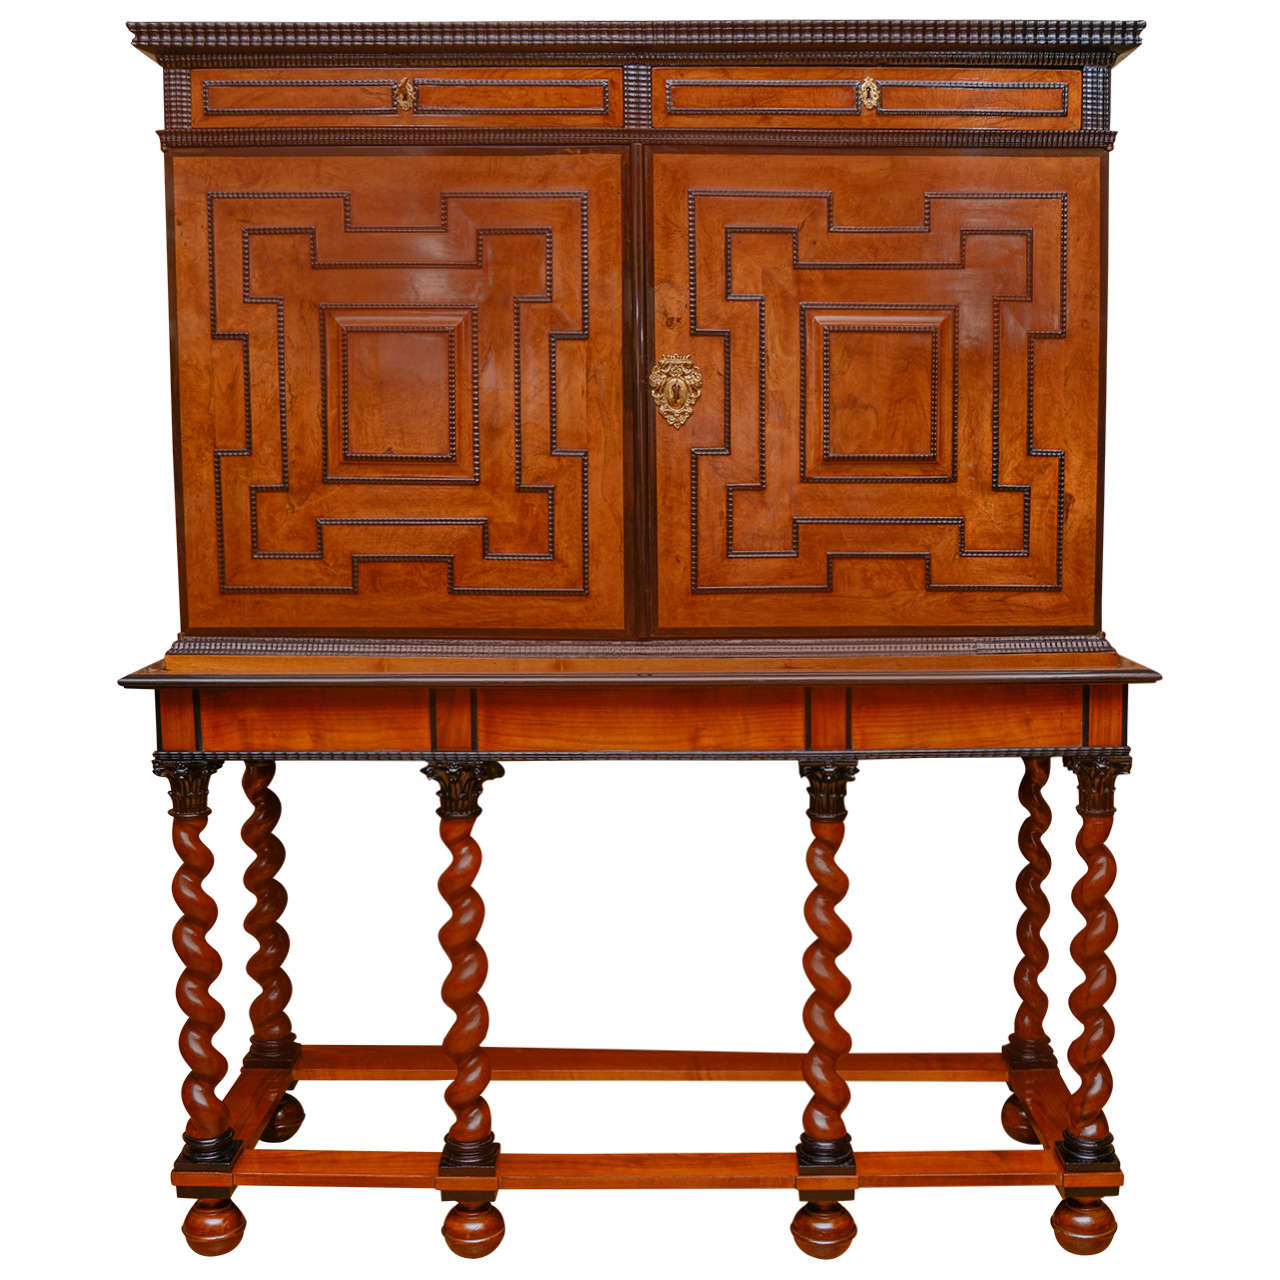 Very nice olive wood, walnut and ebony parquetry.
Opening by two big doors containing 26 drawers and two little doors with columns and capitals. The stand is not antique.